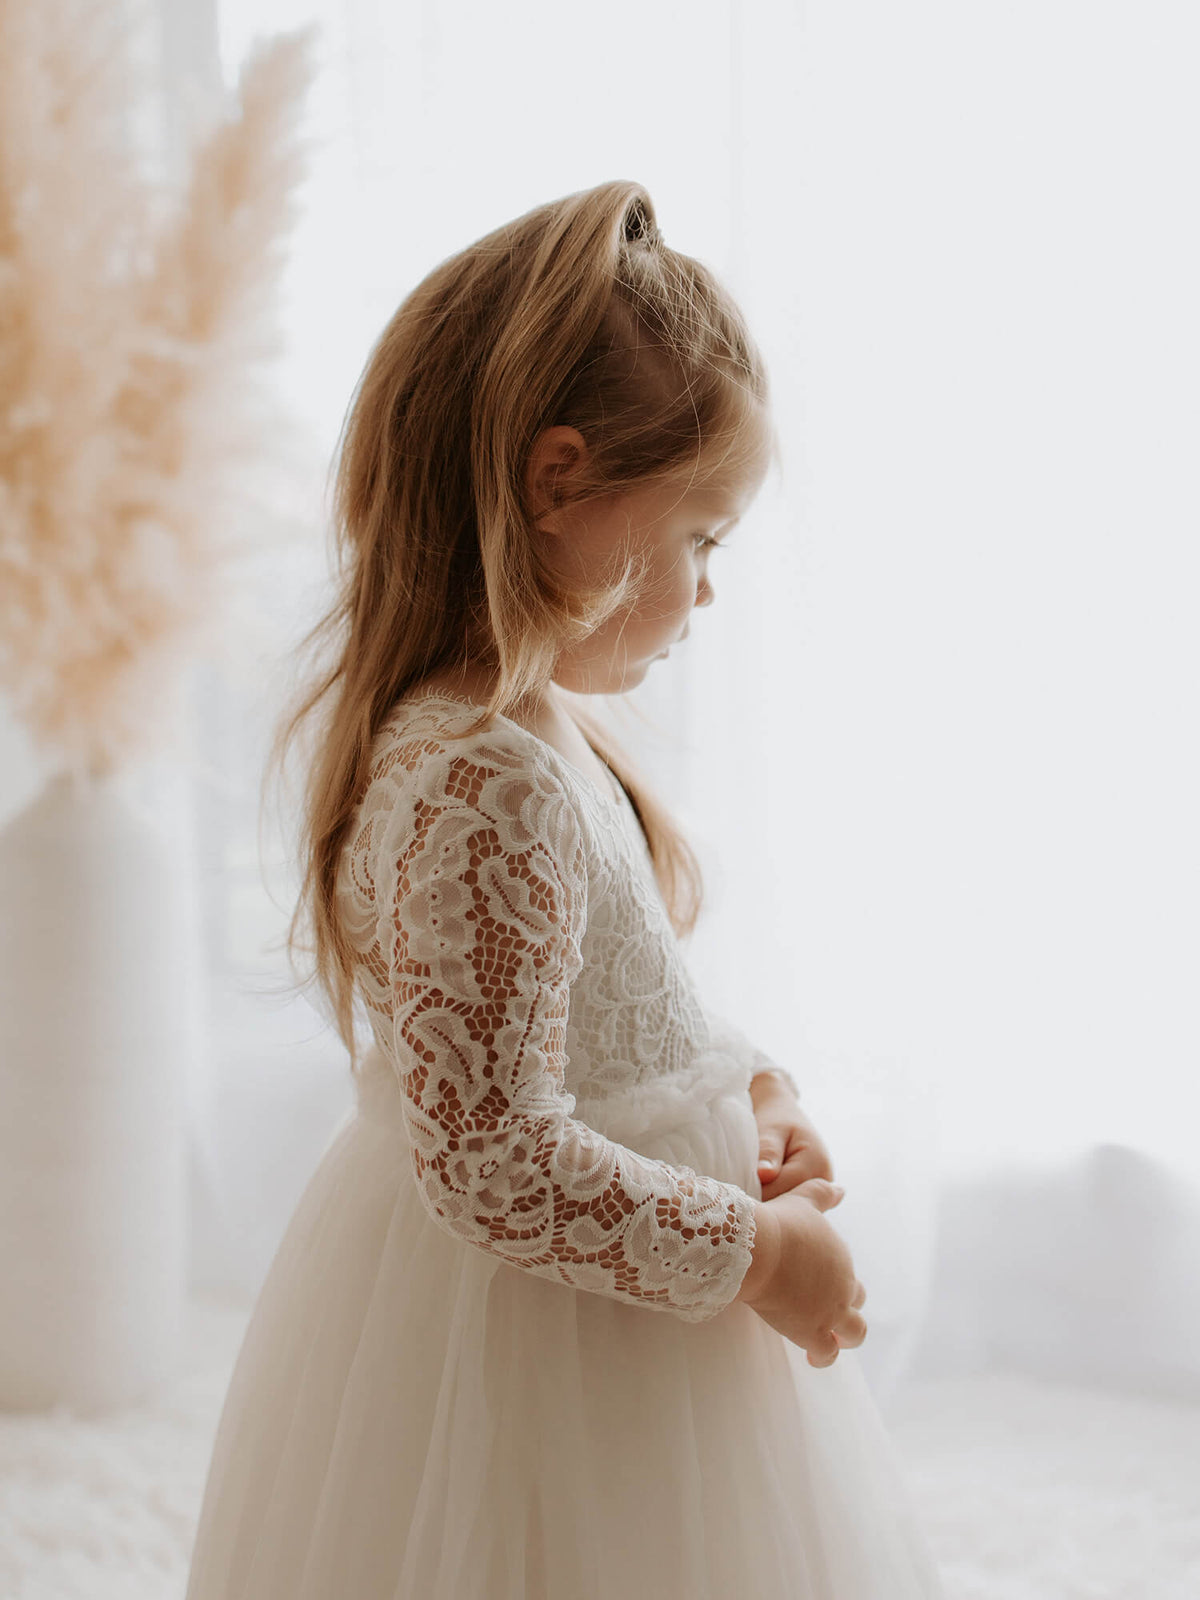 Belle flower girl dress in tea length shown from the side, worn by a young flower girl.